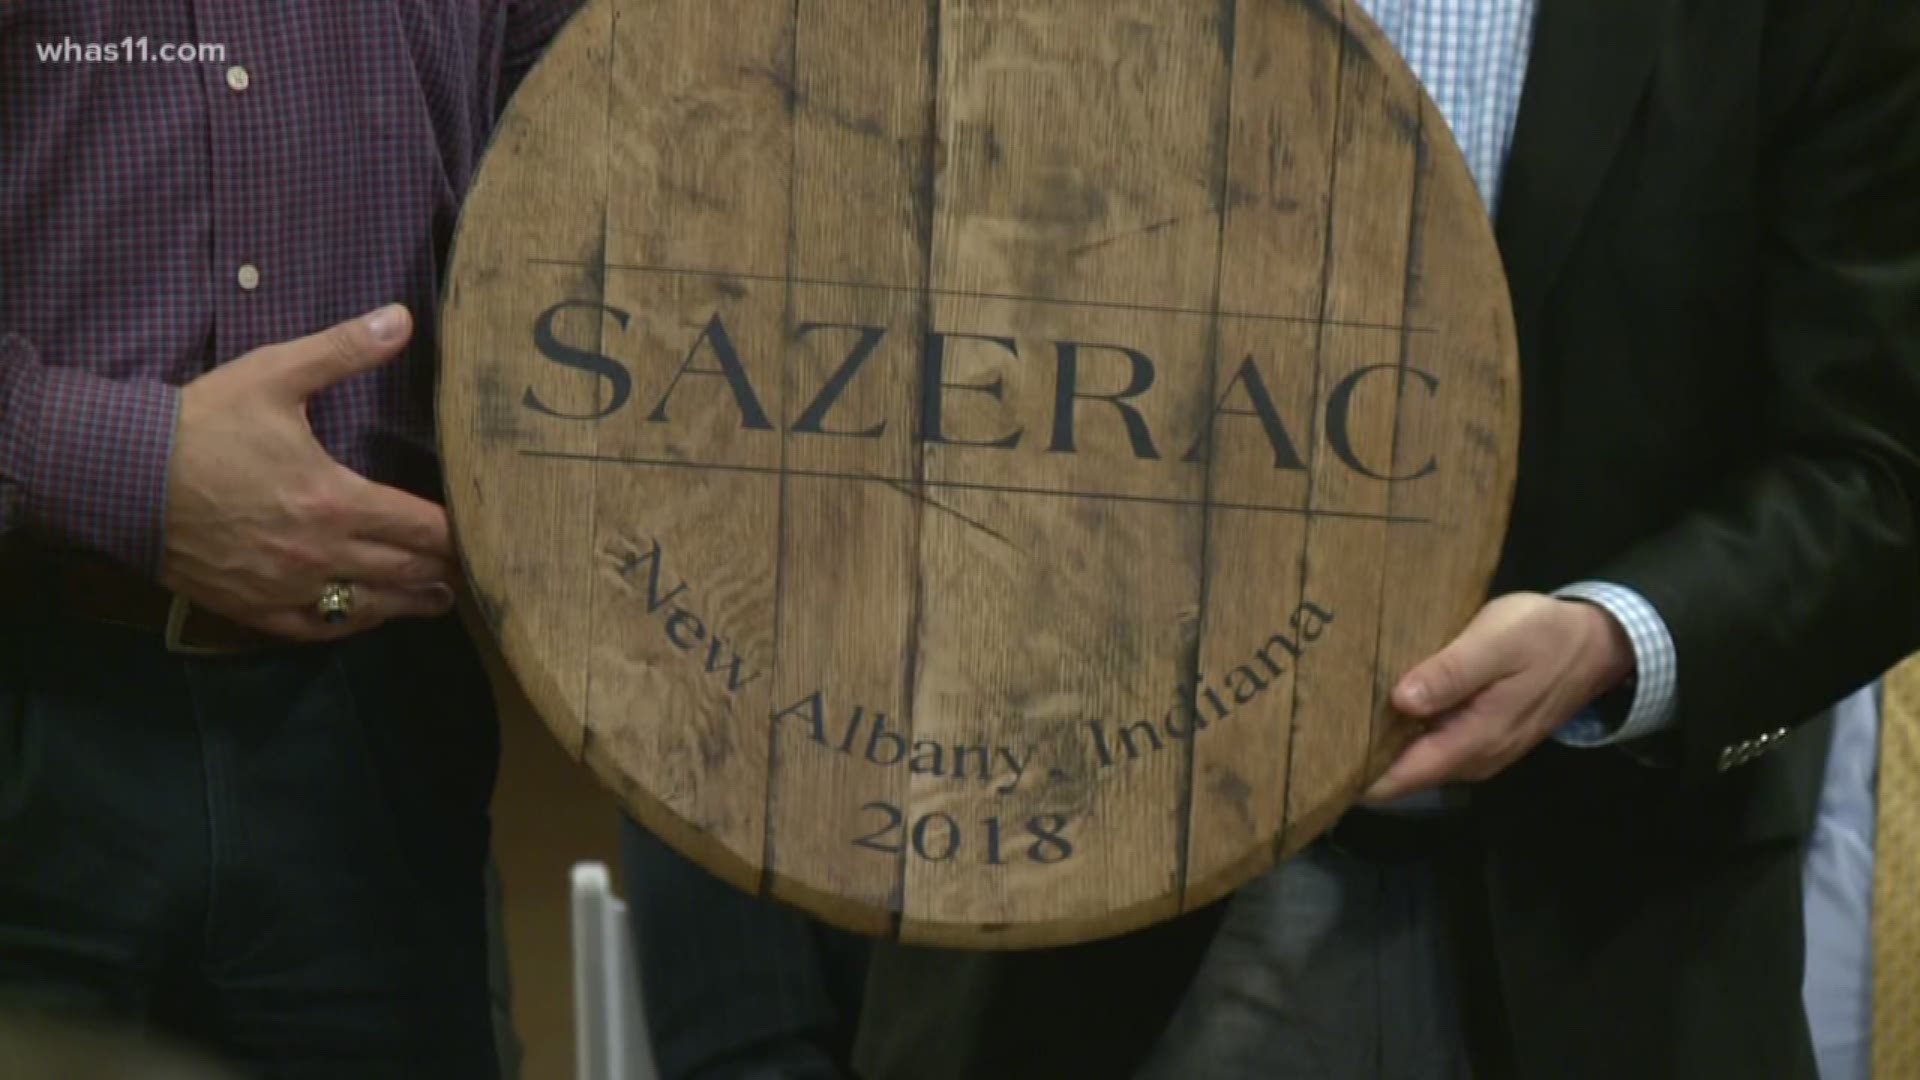 New Albany City Council approves tax incentives for Sazerac